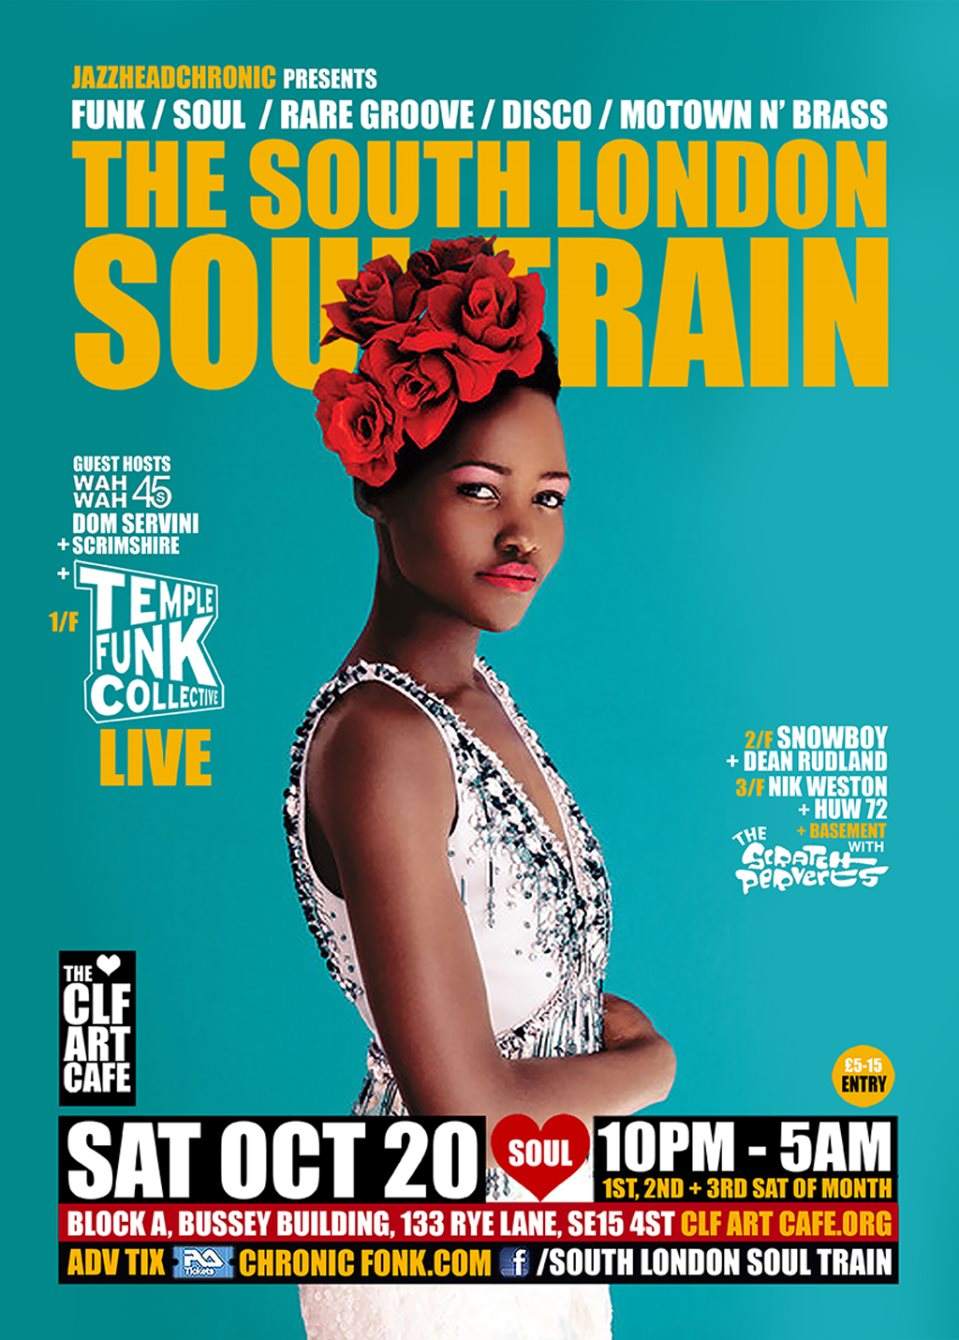 The South London Soul Train with Bad Rabbits (Live) - More on 4 Floors - Página trasera